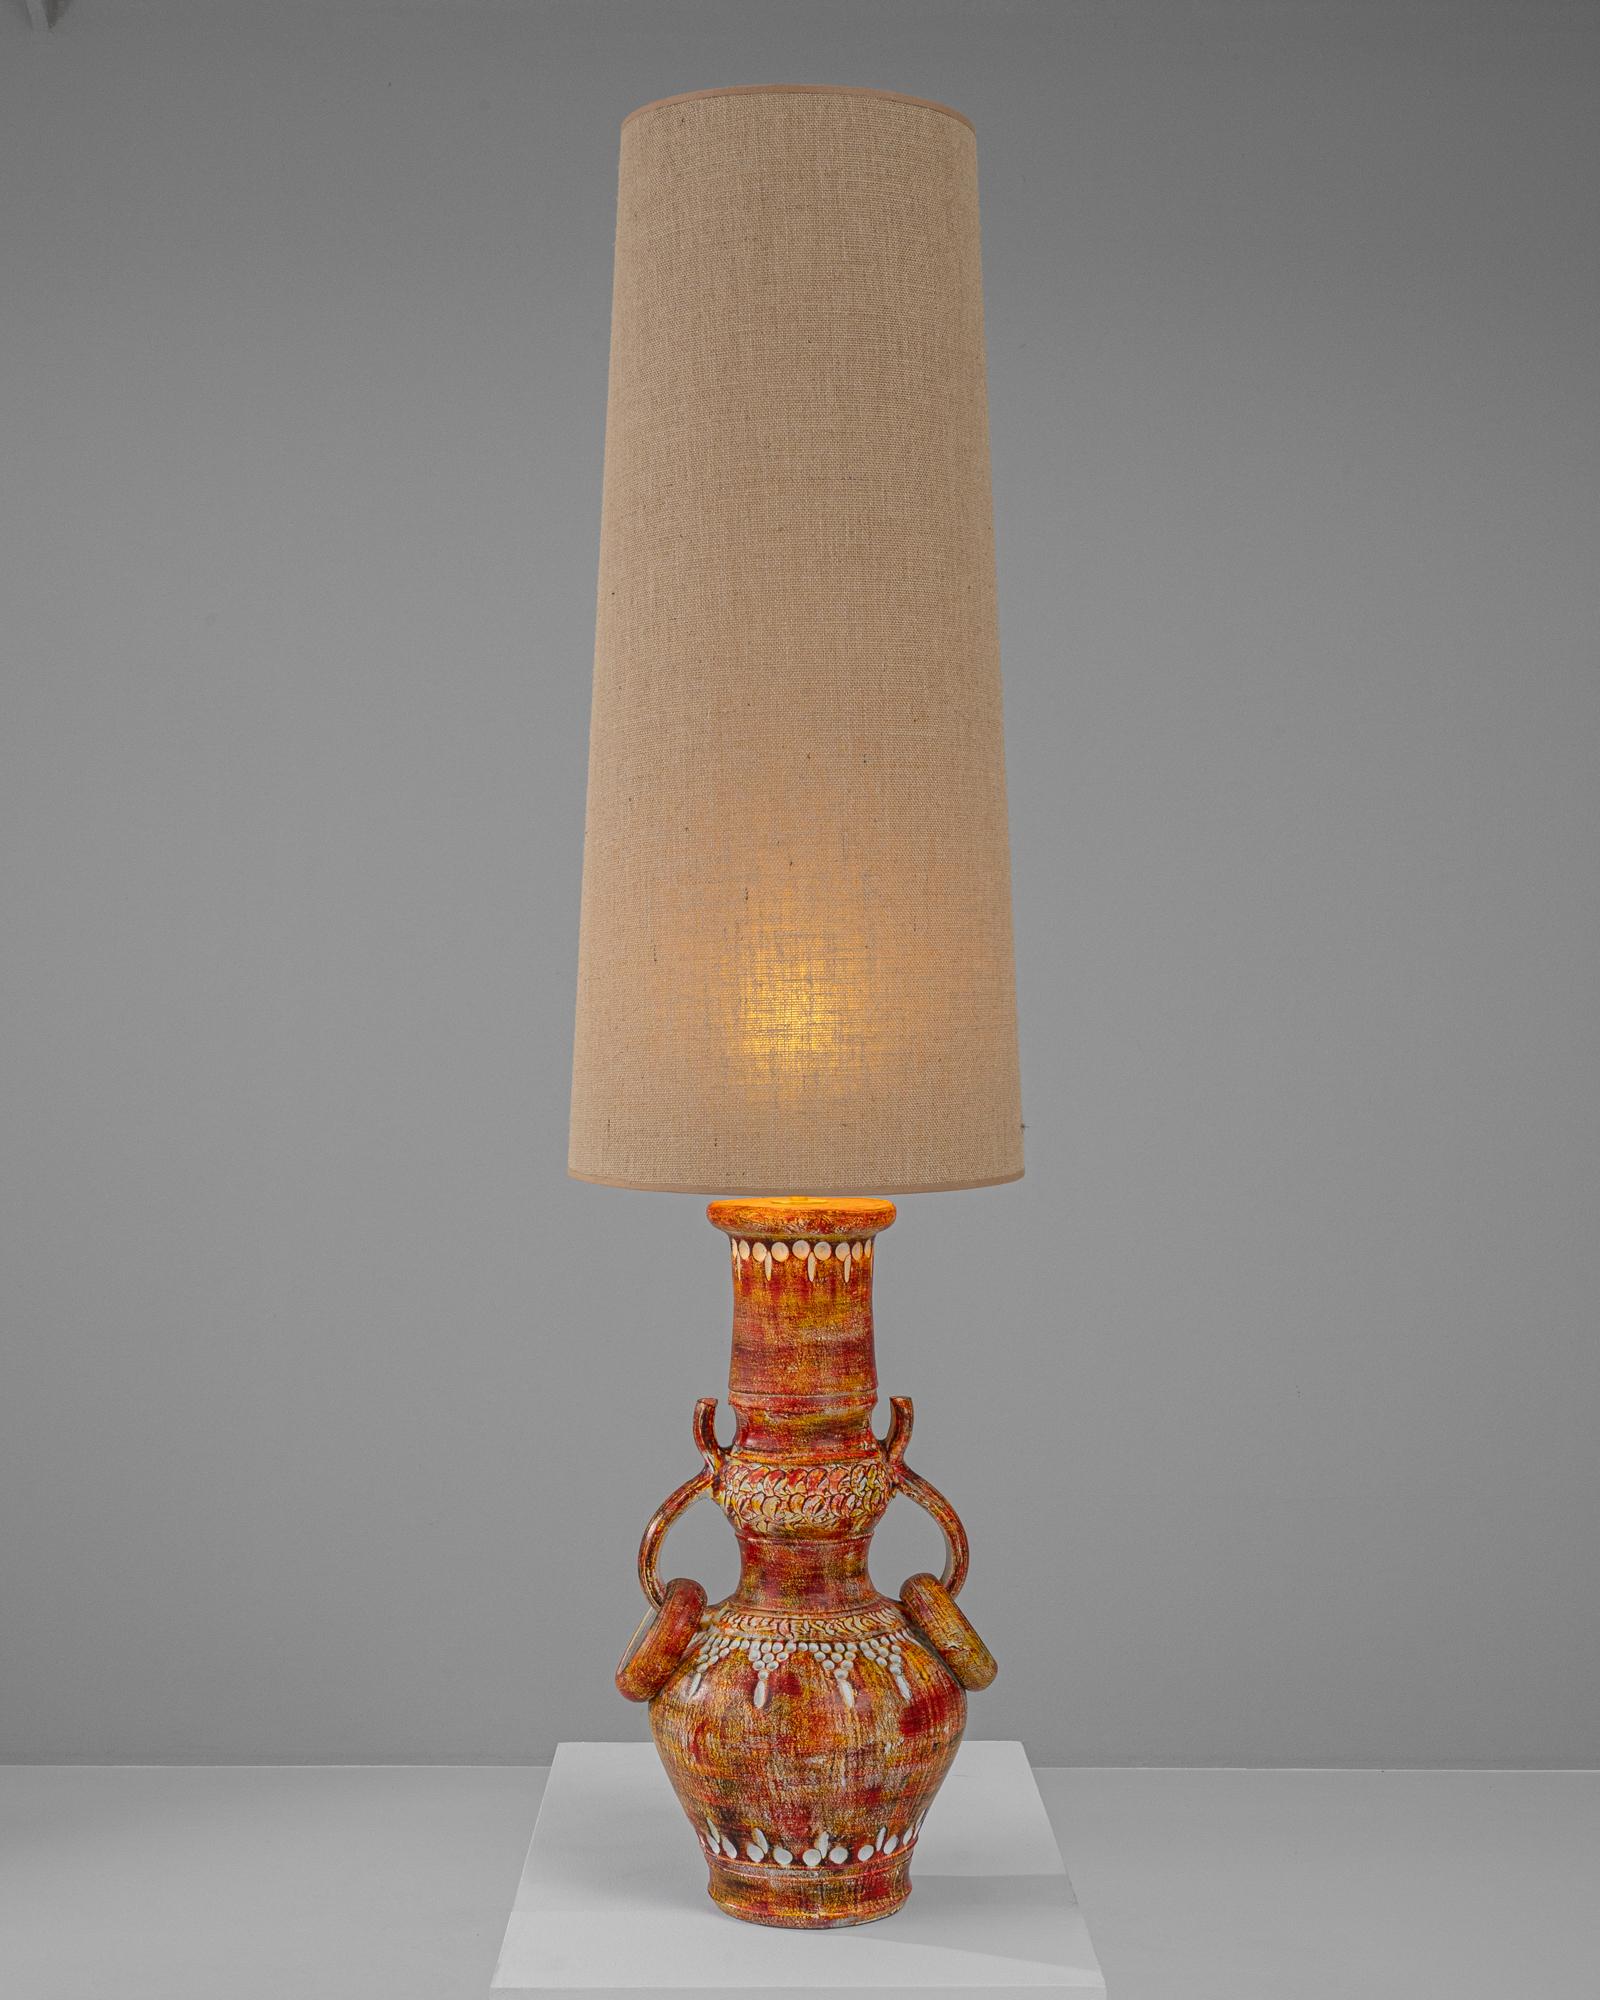 Brighten your home with a touch of artisanal charm using this 20th-century German ceramic table lamp. Expertly crafted, the lamp features a vibrant, multi-hued base adorned with intricate detailing and traditional motifs that evoke a sense of